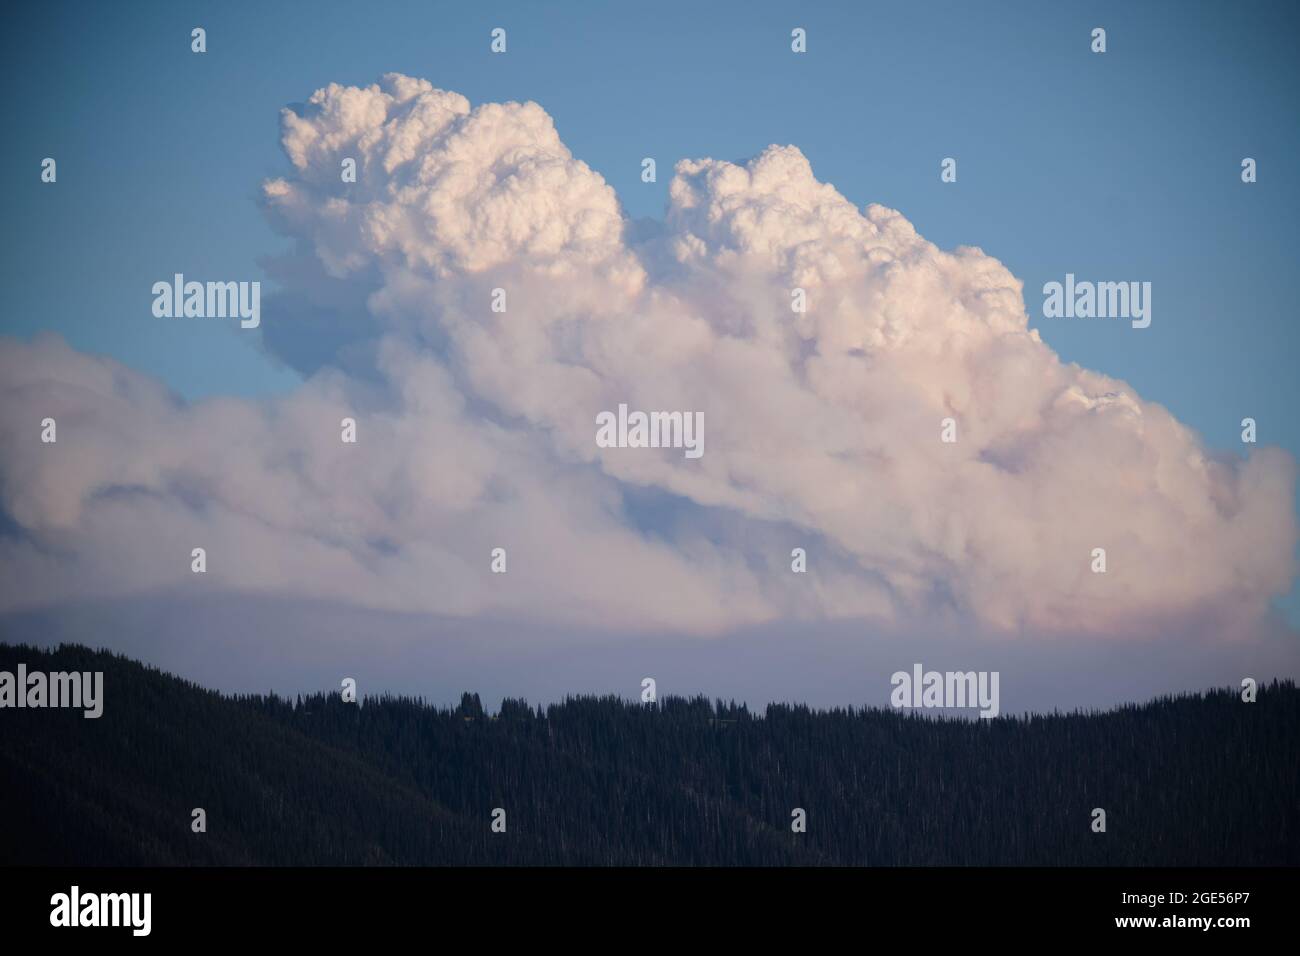 Smoke and heated air from growing wildfire near Manning Park, BC creates its own weather system with cumulo-nimbus clouds seen developing over forest Stock Photo